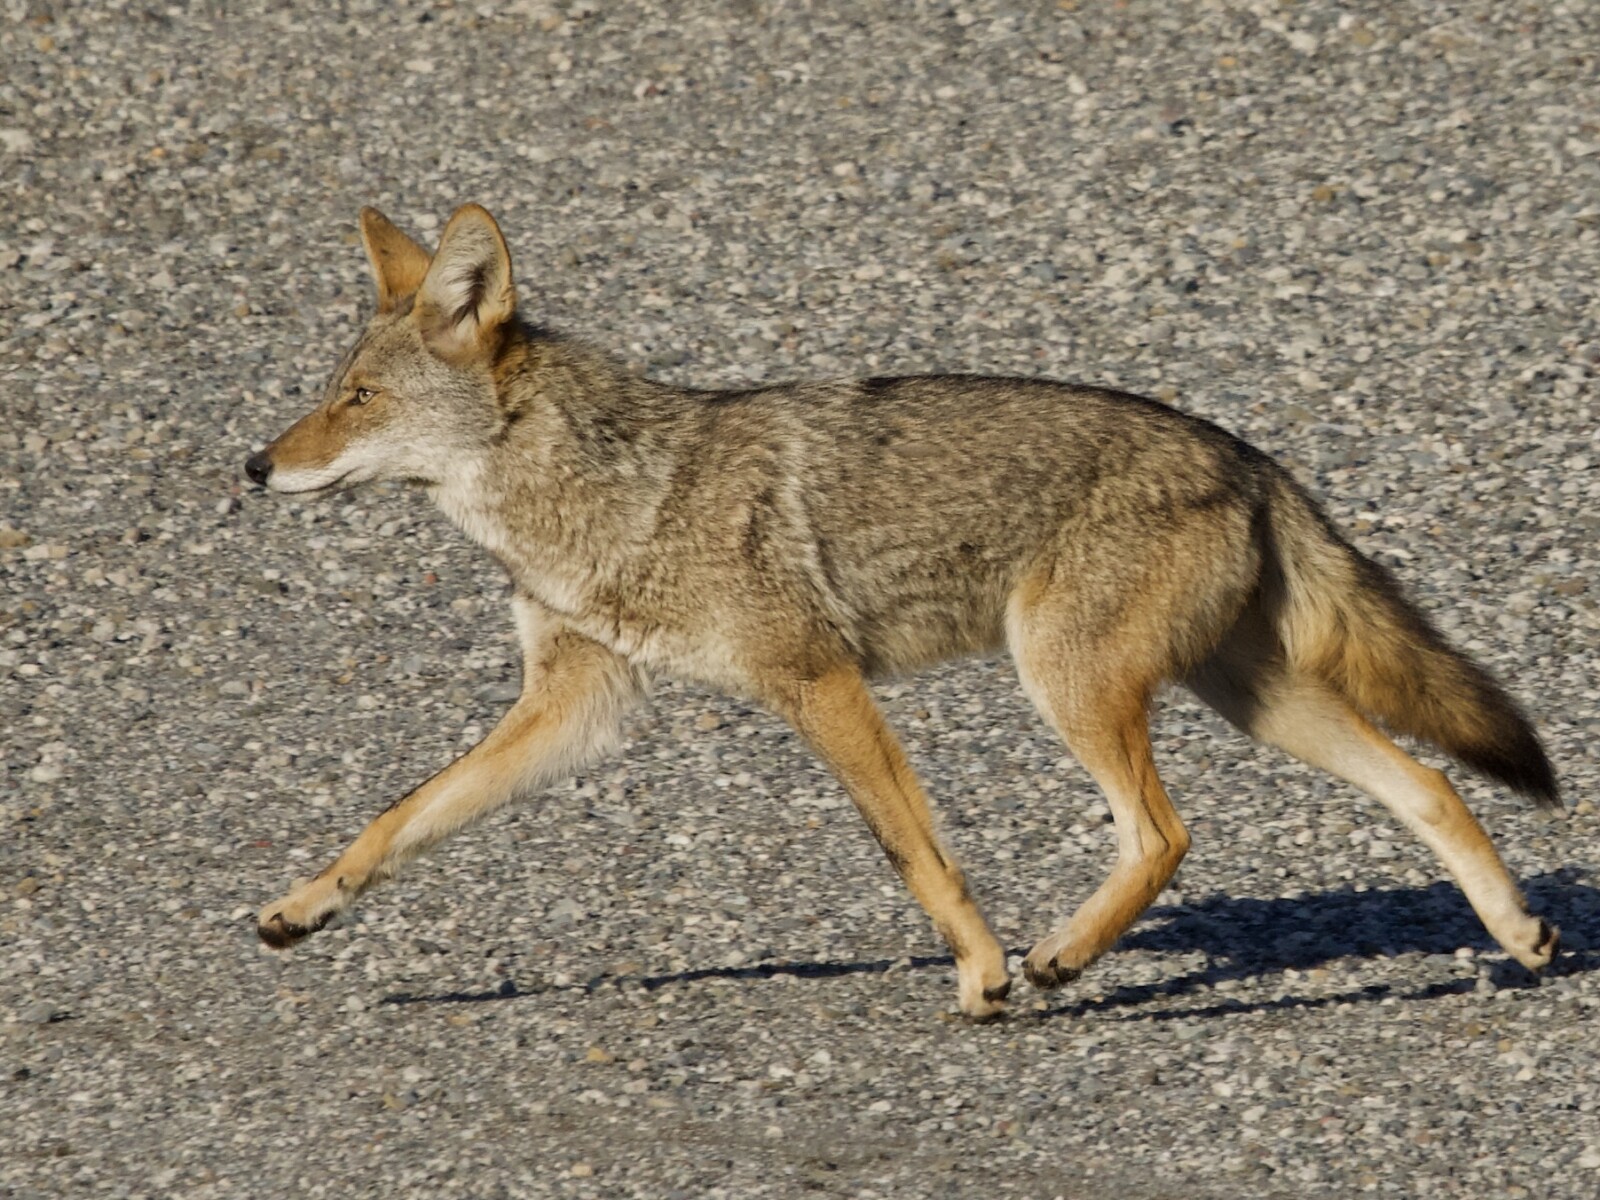 Bay Area Coyote Crossing Hiking Trail